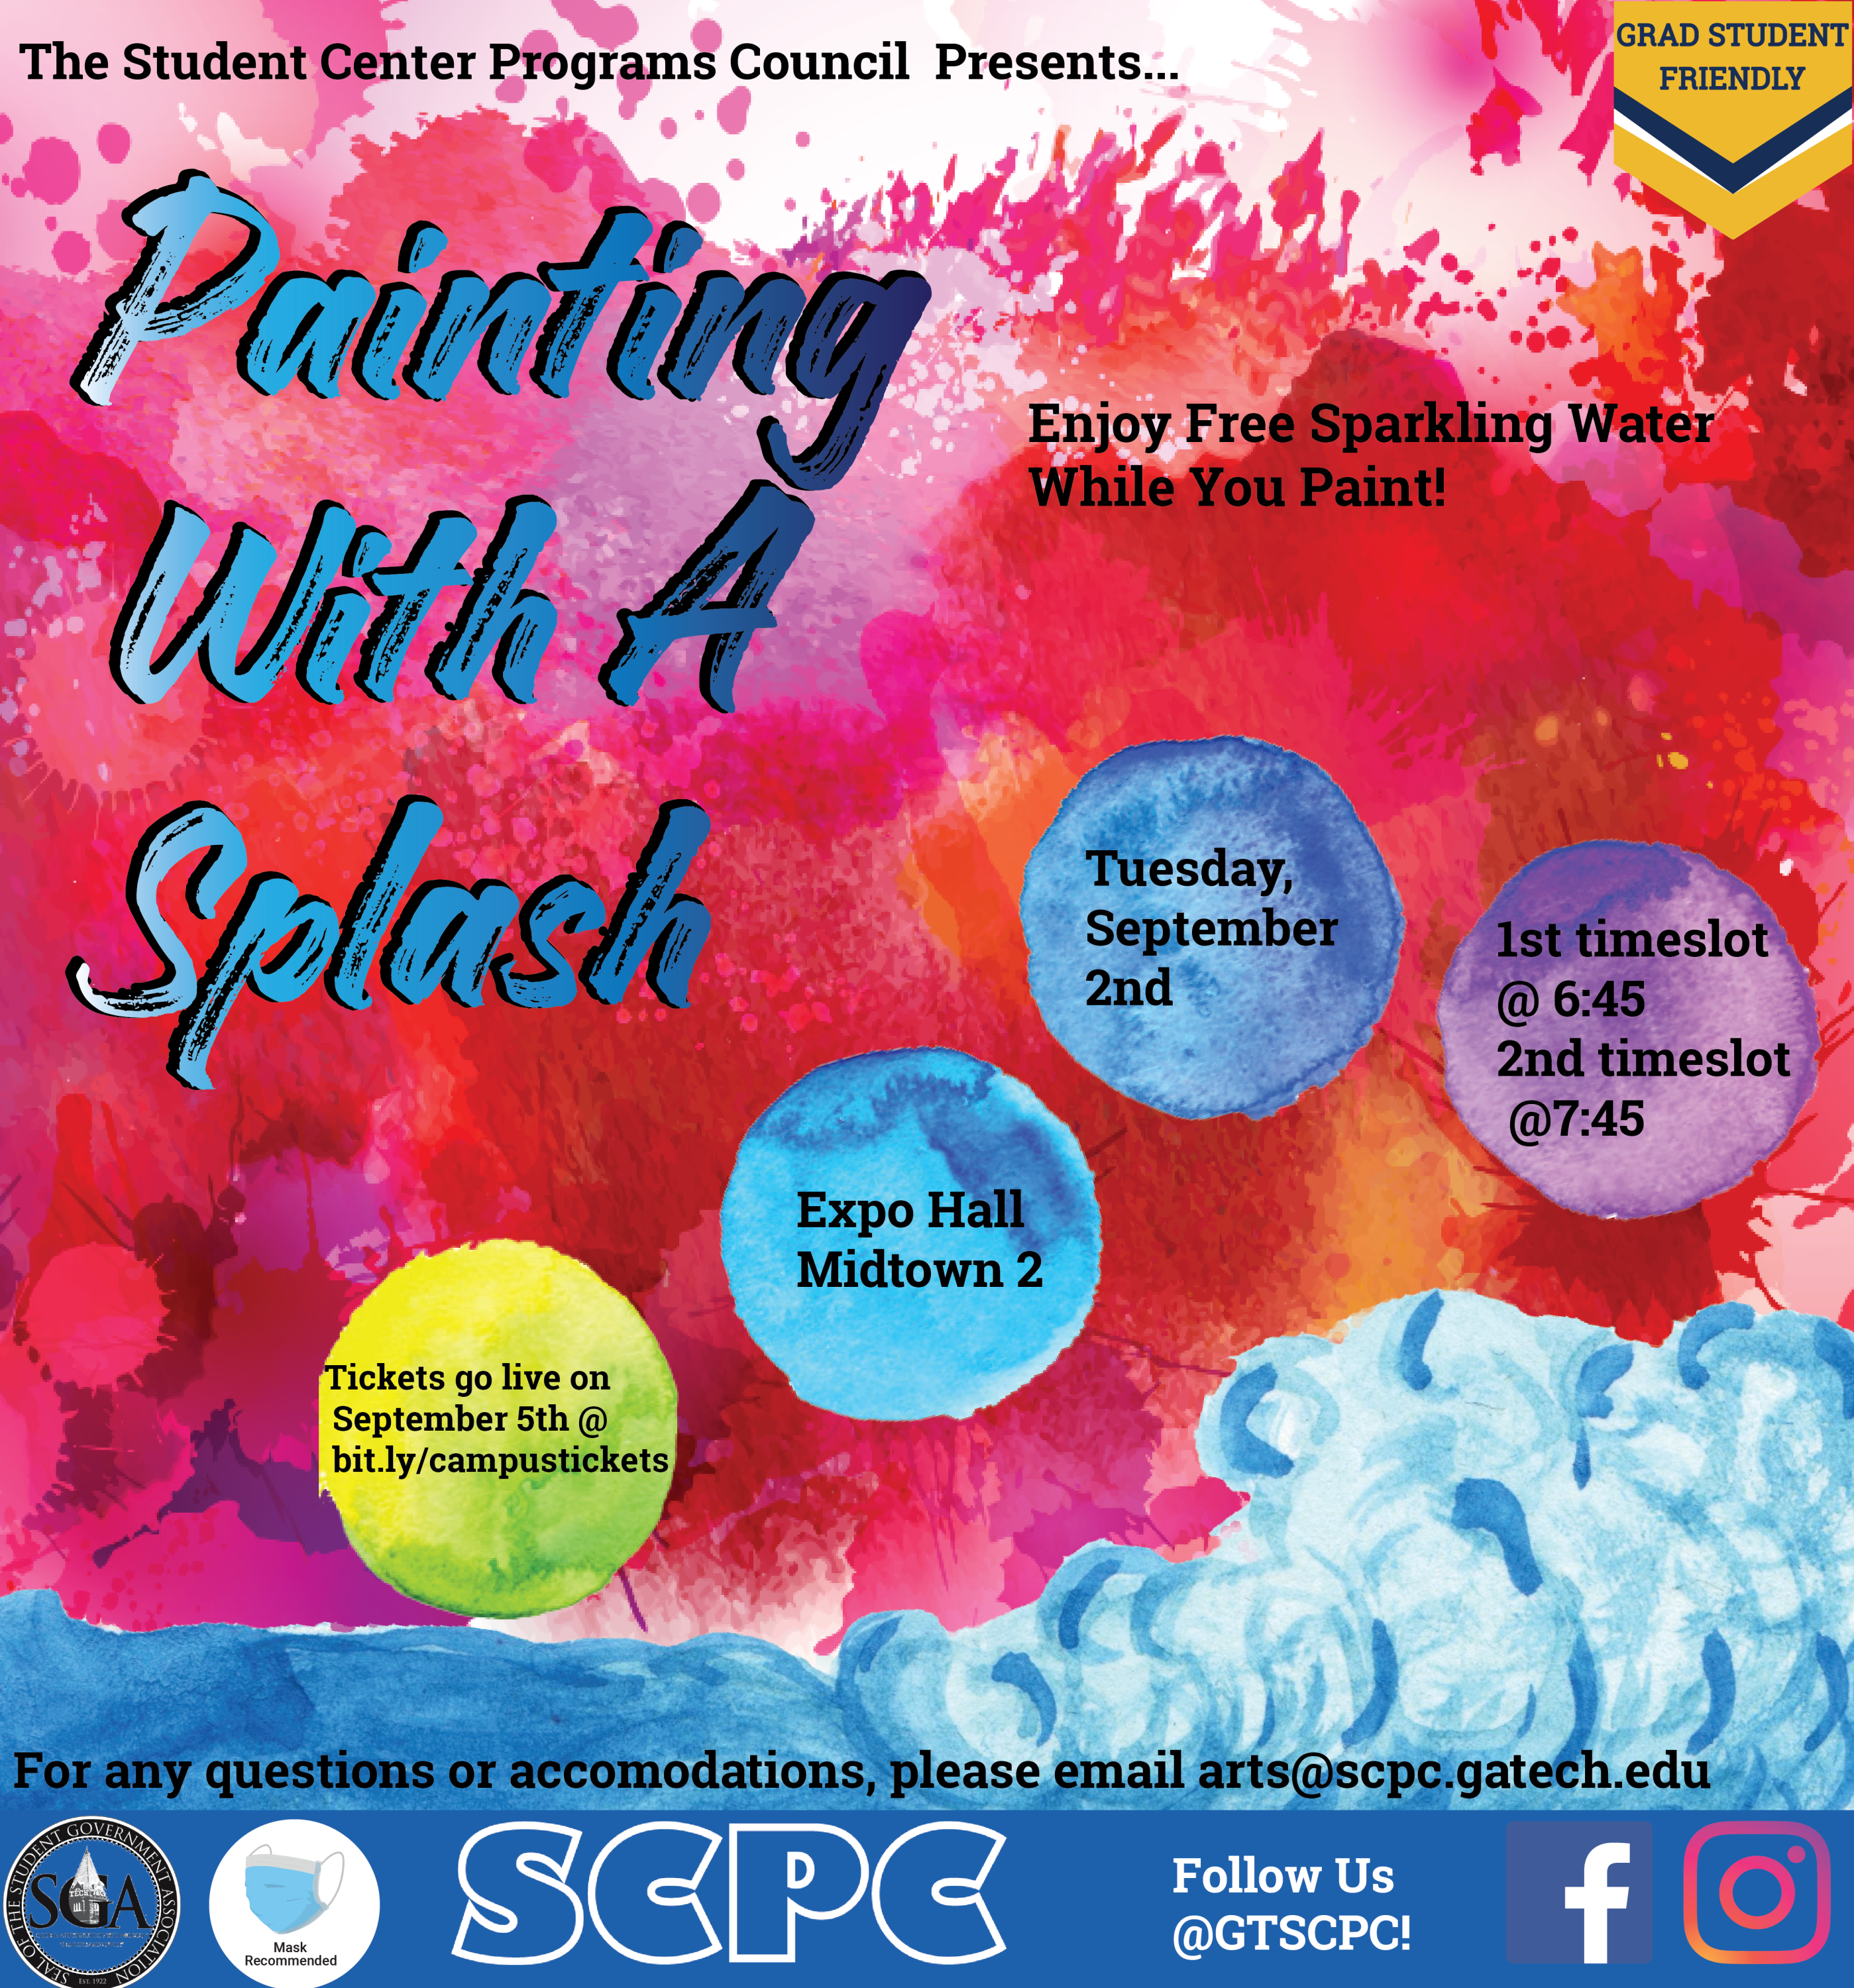 Painting With A Splash will host an instructor who will teach GT students how to paint self-portraits using acrylic paint. 

This event will also provide students with Spindrift Sparkling Water as you paint!